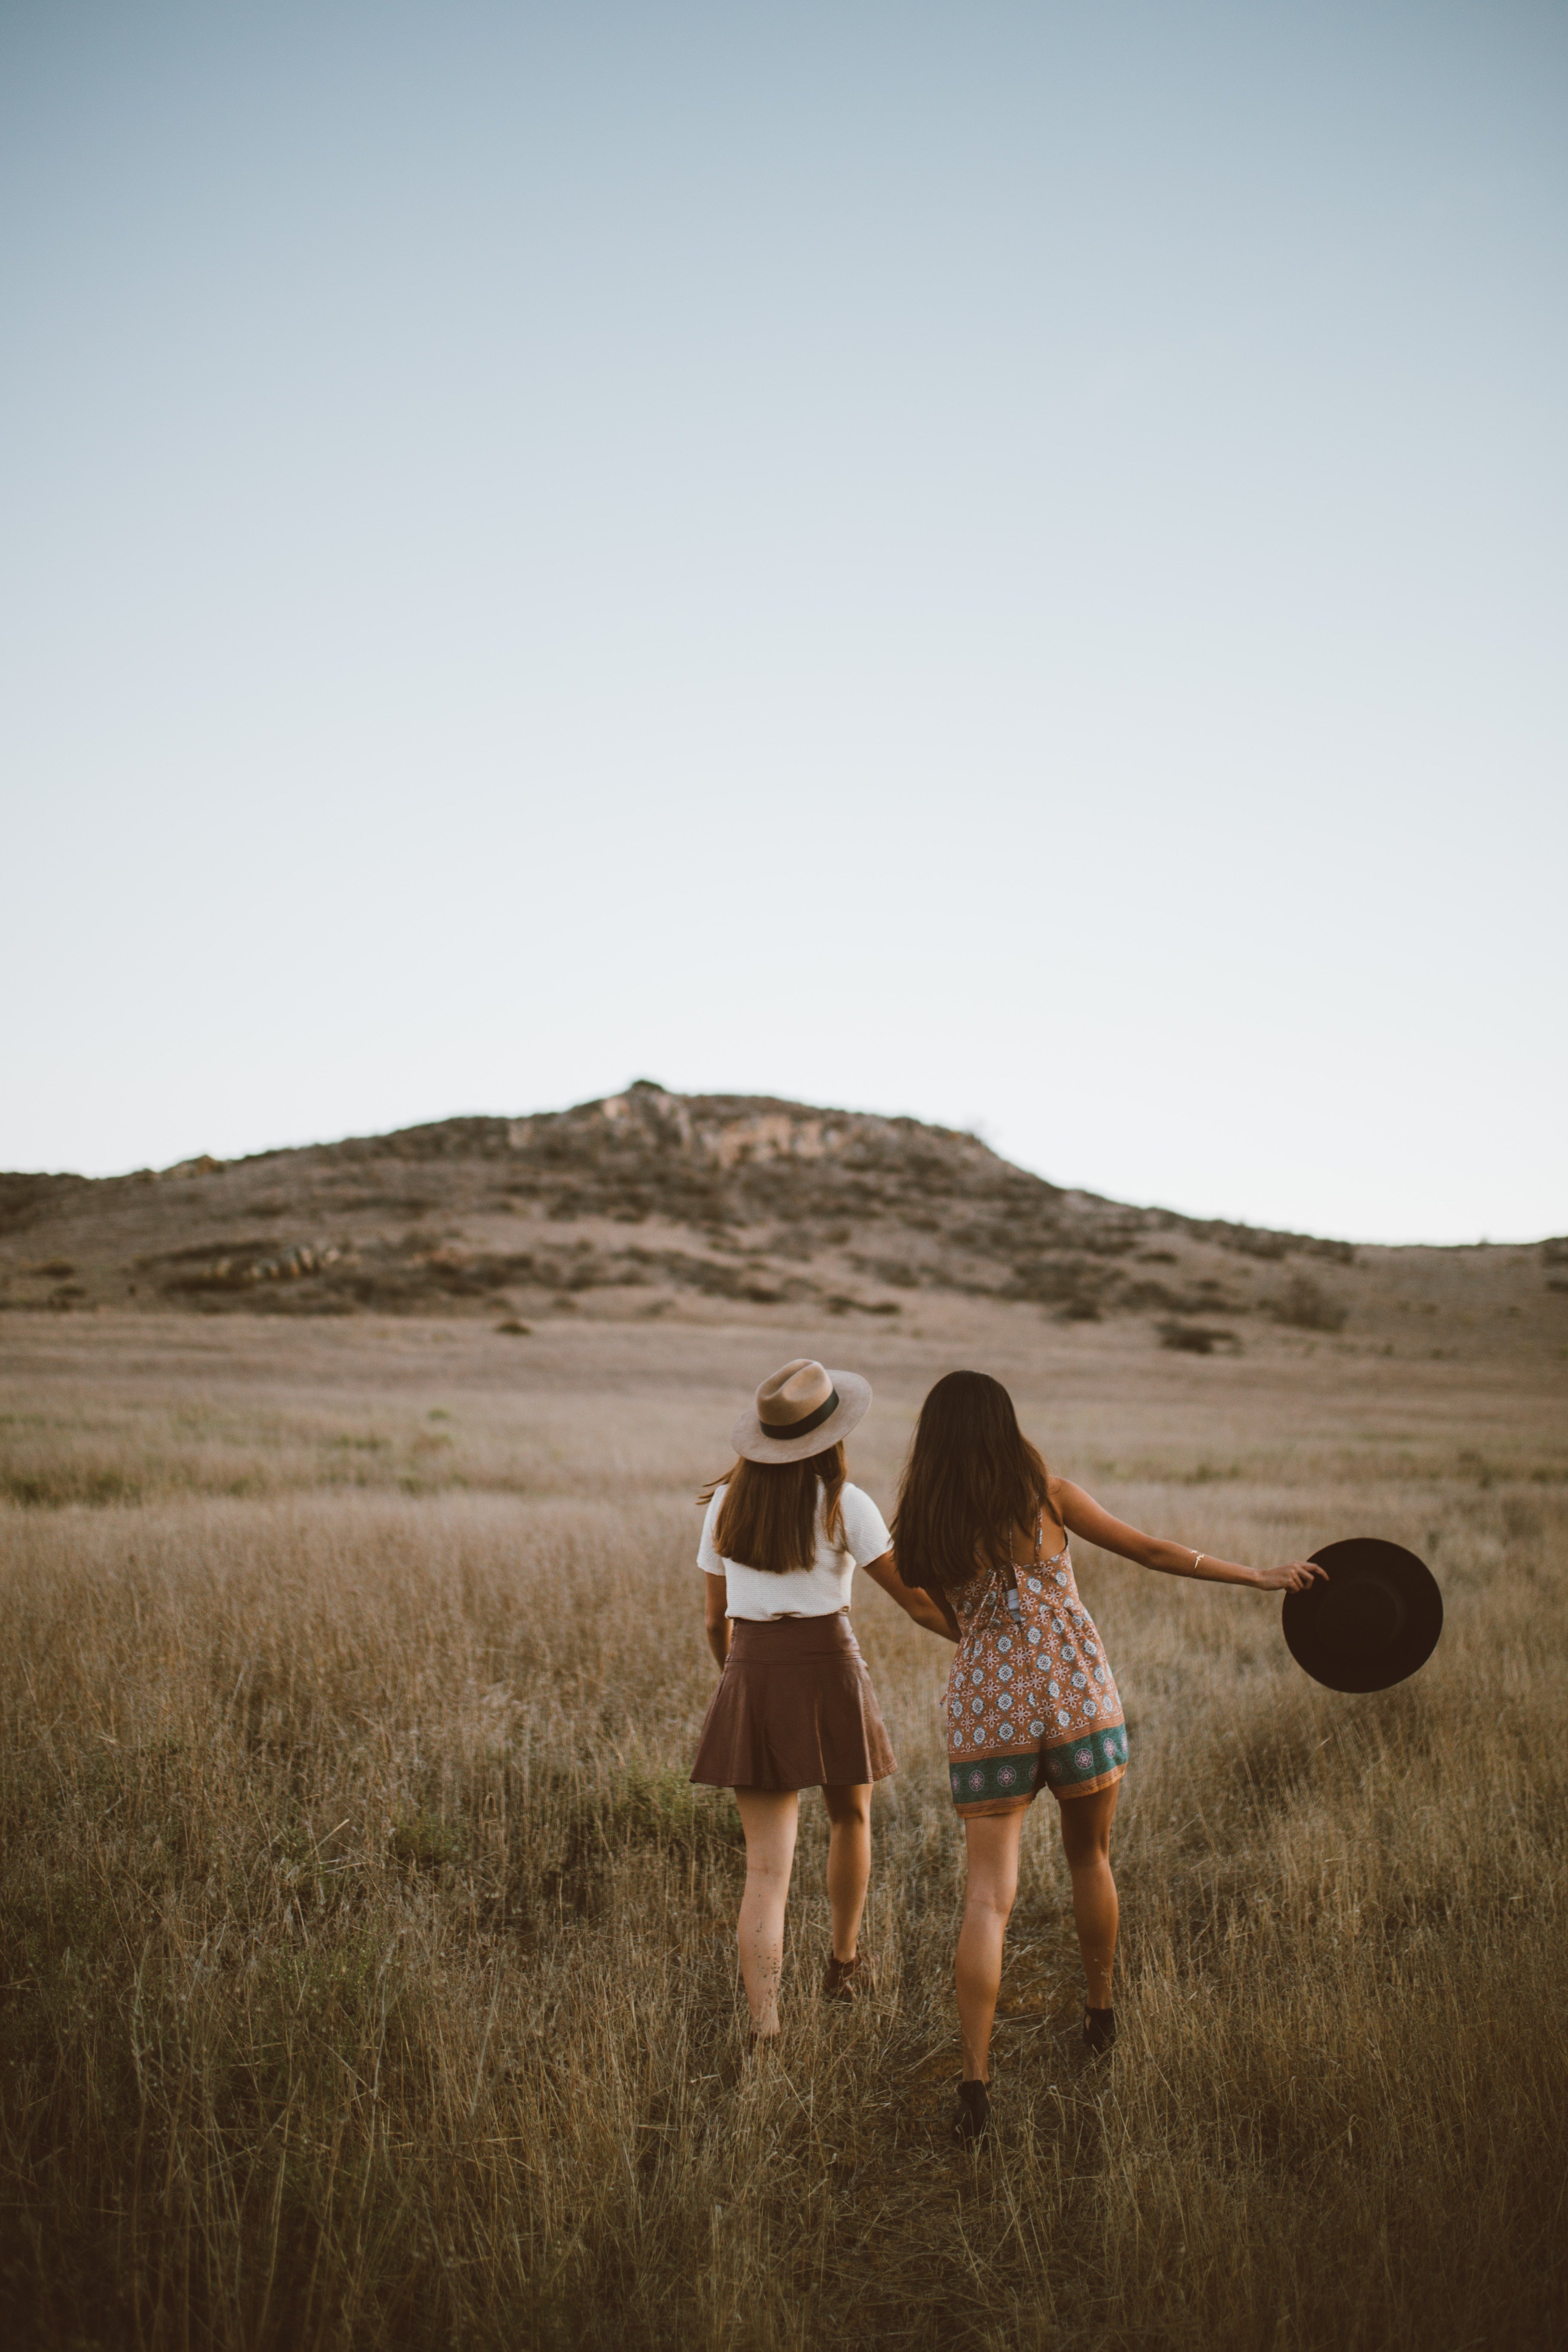 Two young women in grassy western field in wide brim hats and dresses